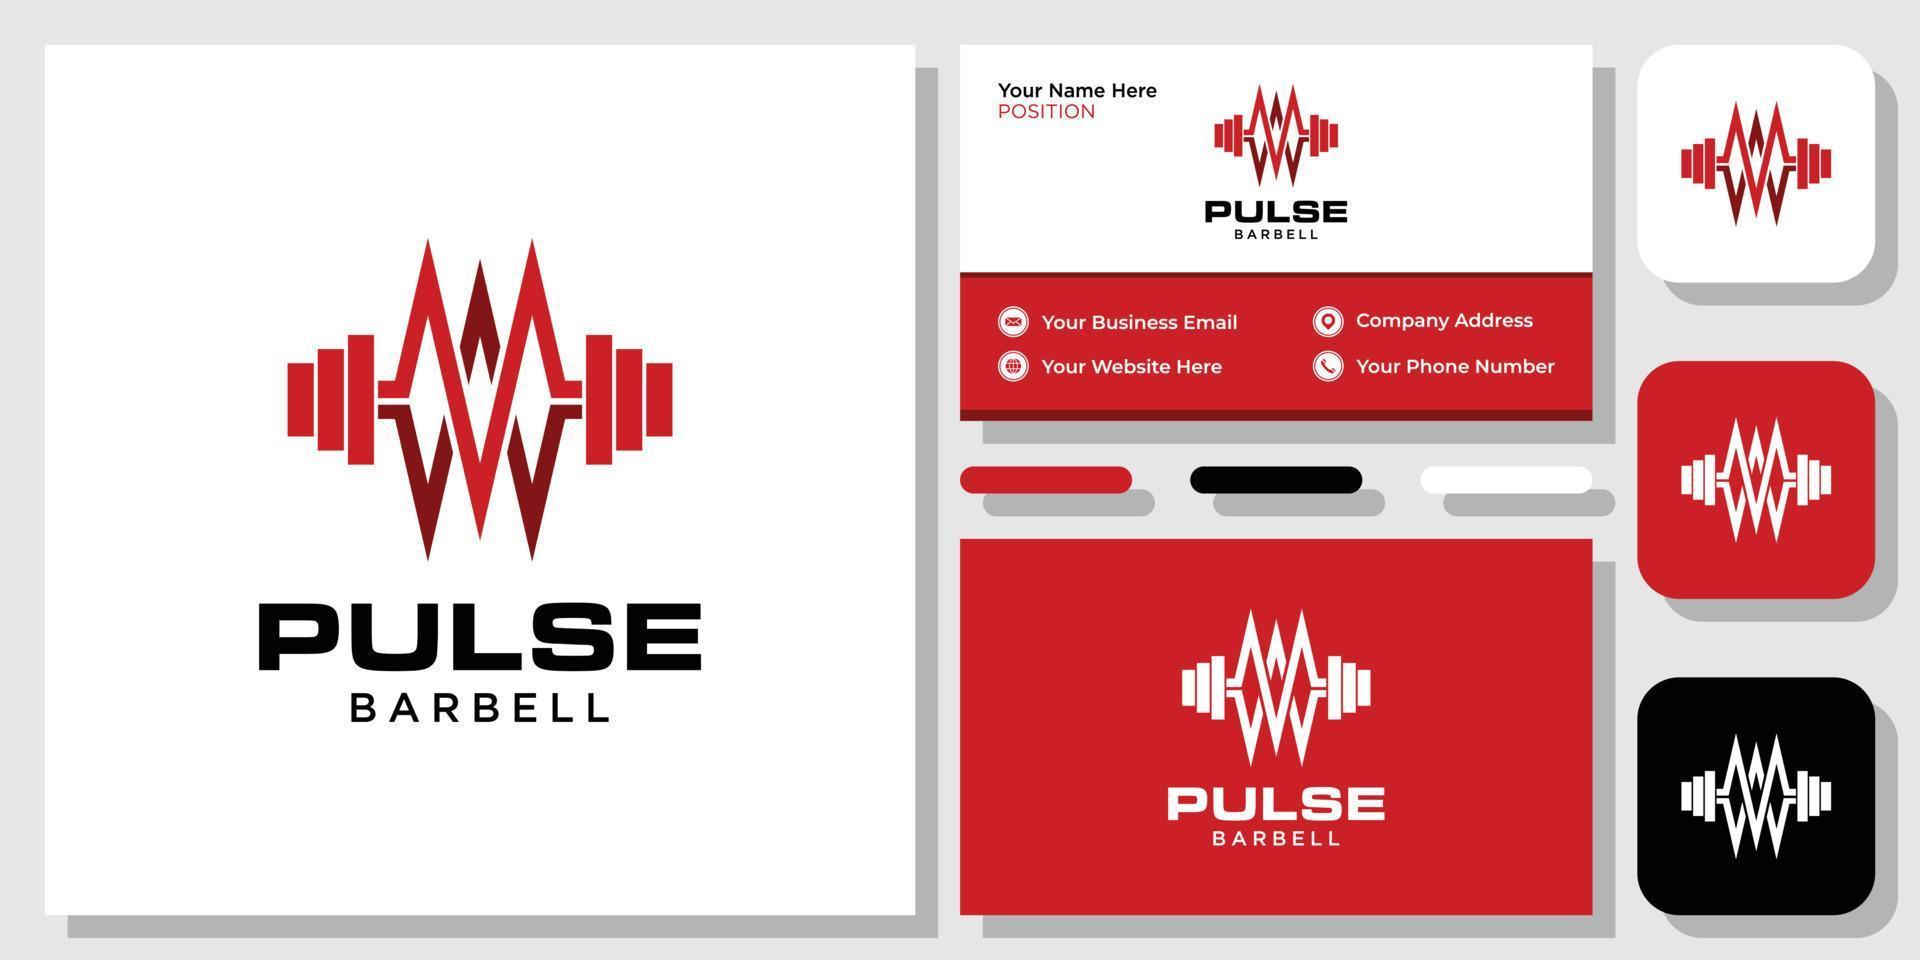 Pulse Barbell healthy heartbeat gym training physical with business card template vector